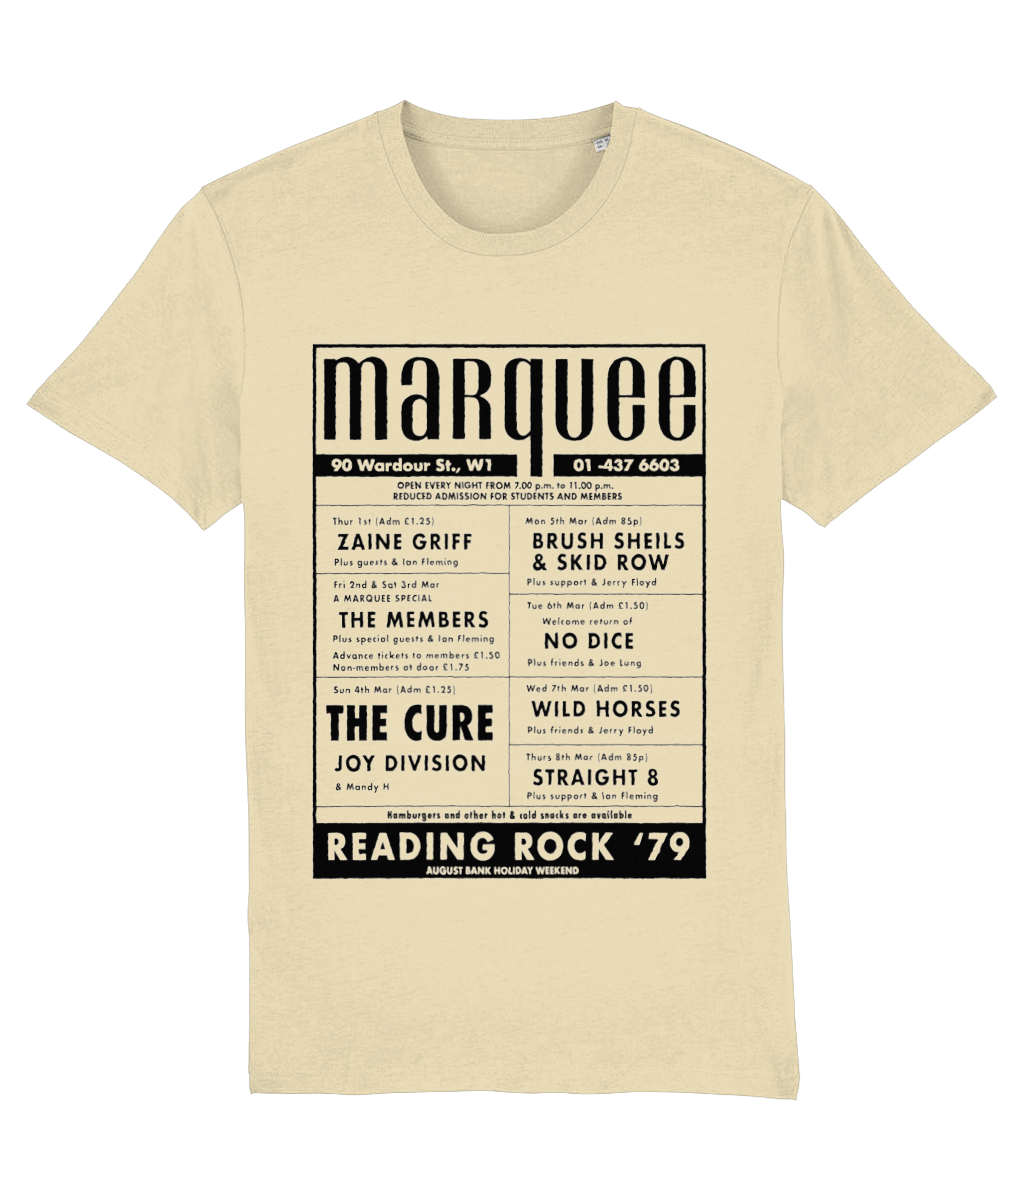 The Cure T-shirt